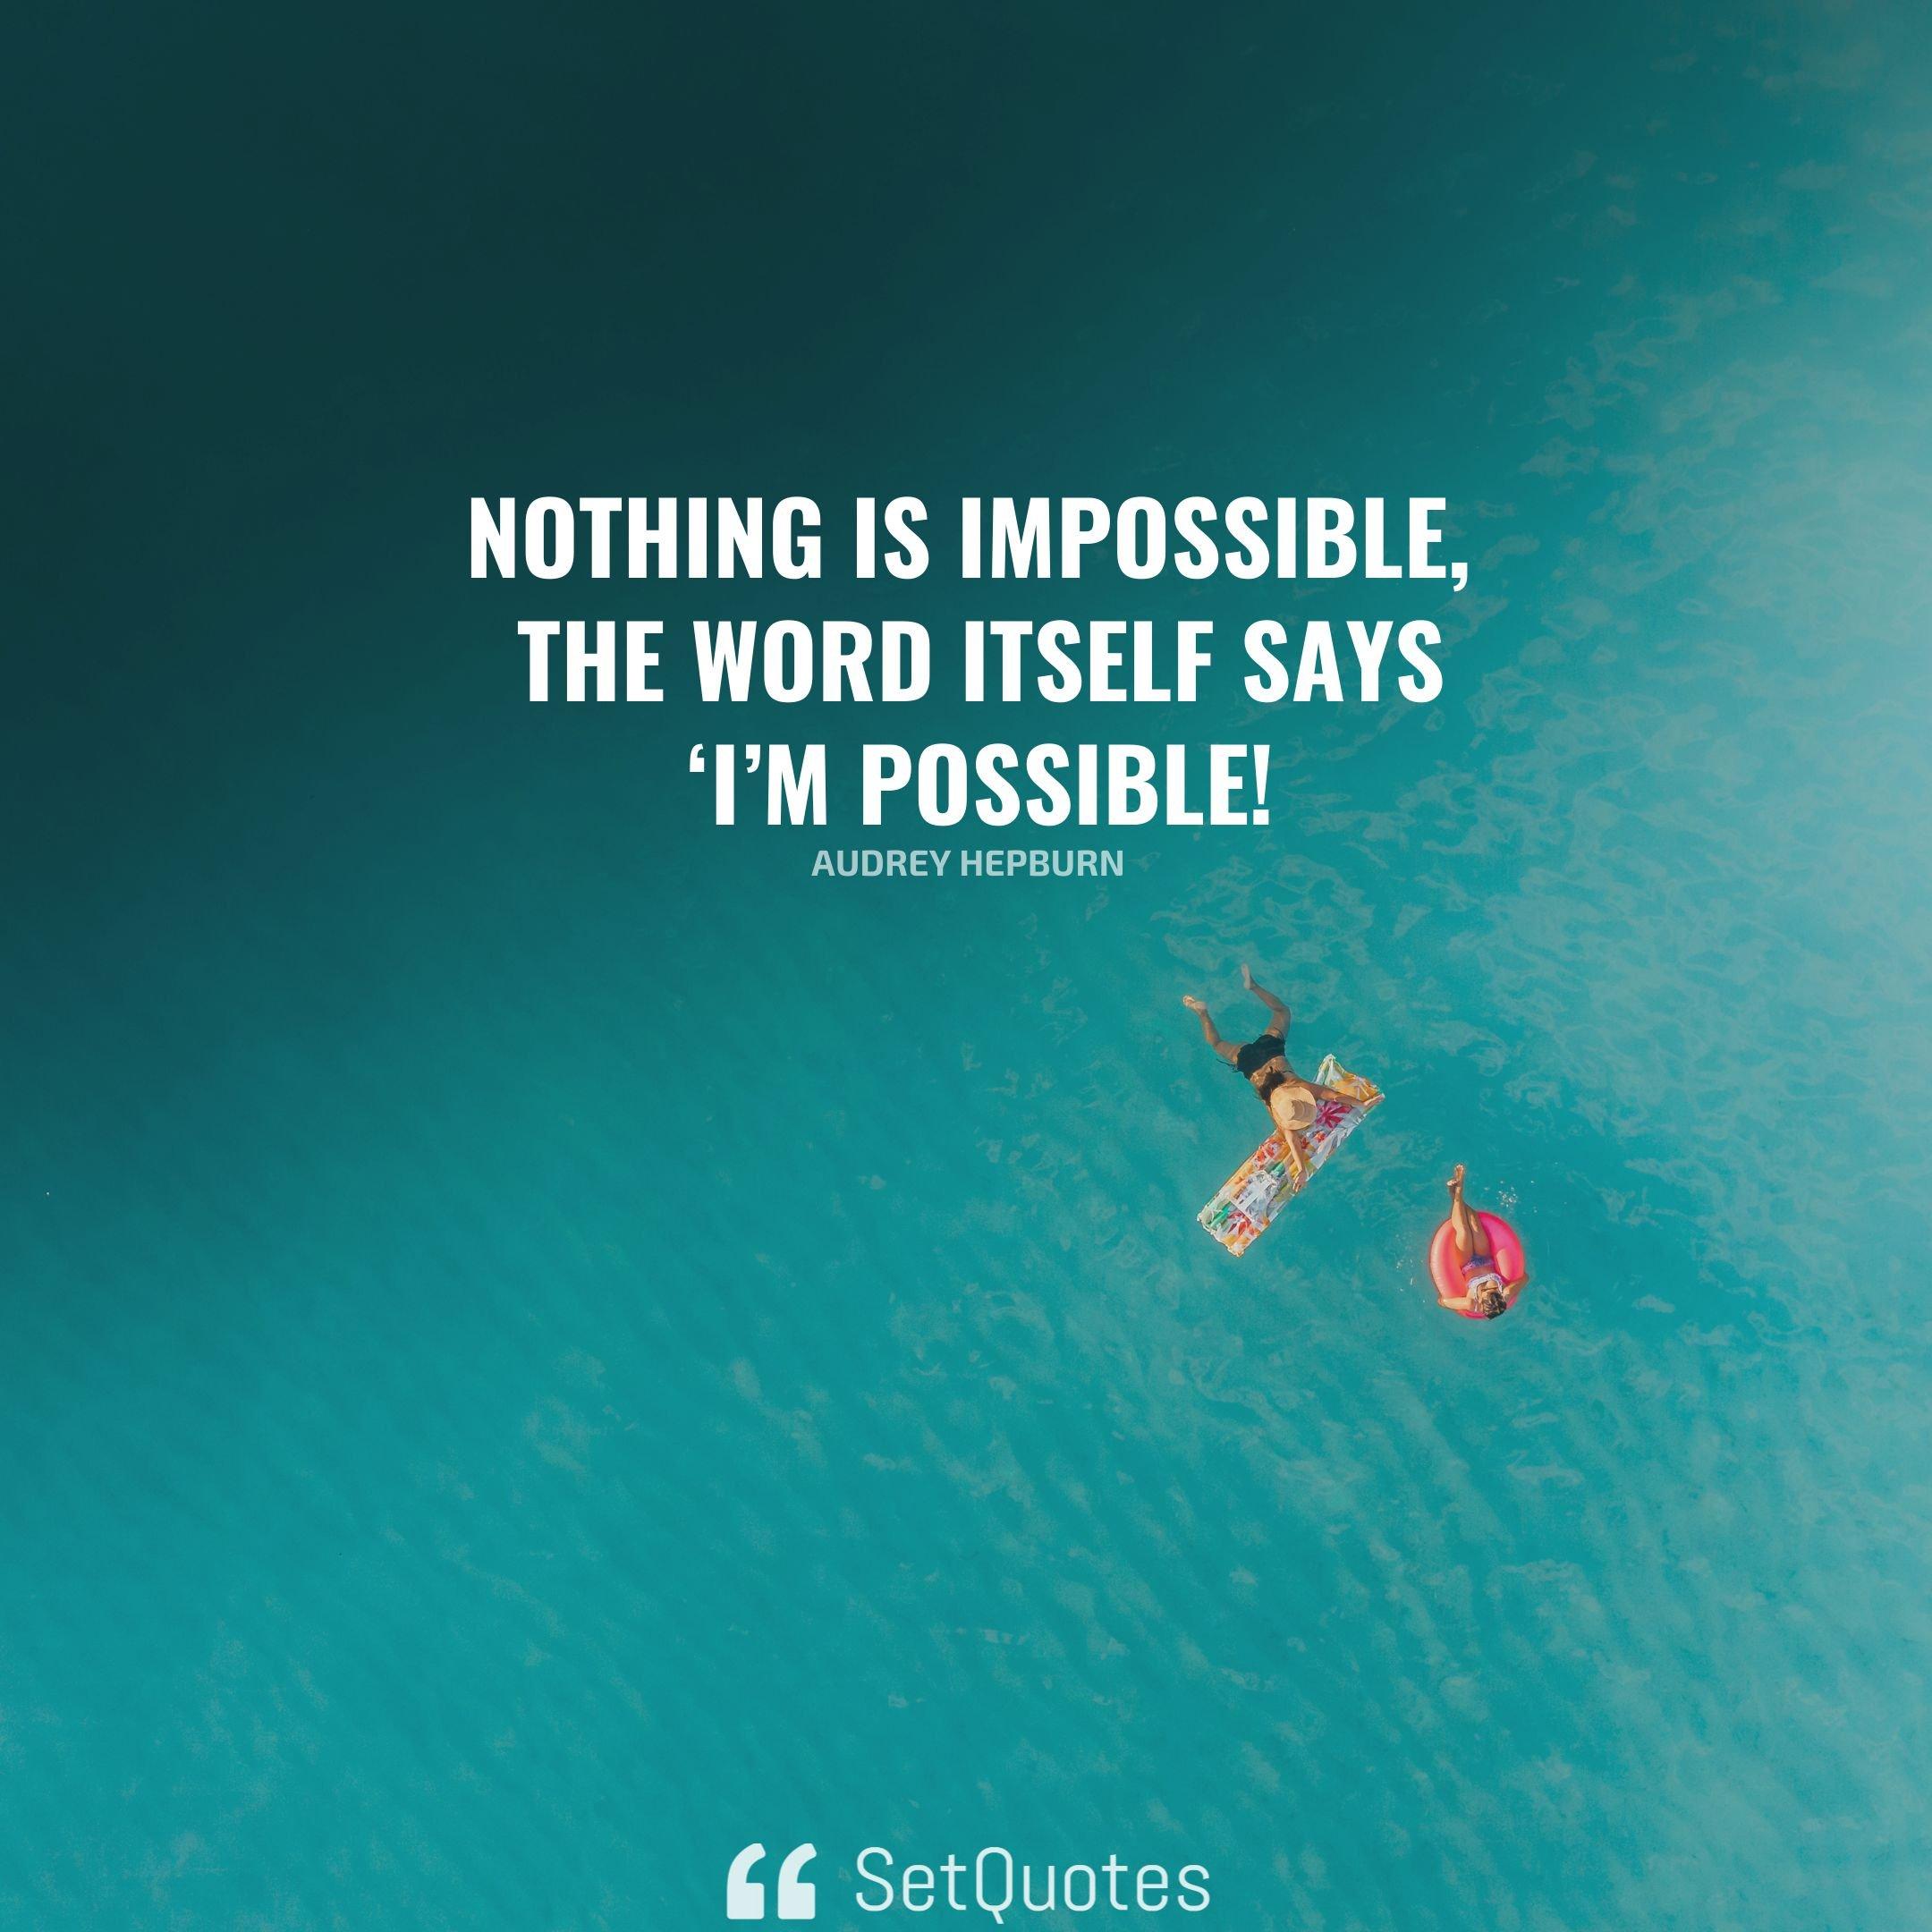 Nothing is impossible, the word itself says ‘I’m possible!’ - Audrey Hepburn